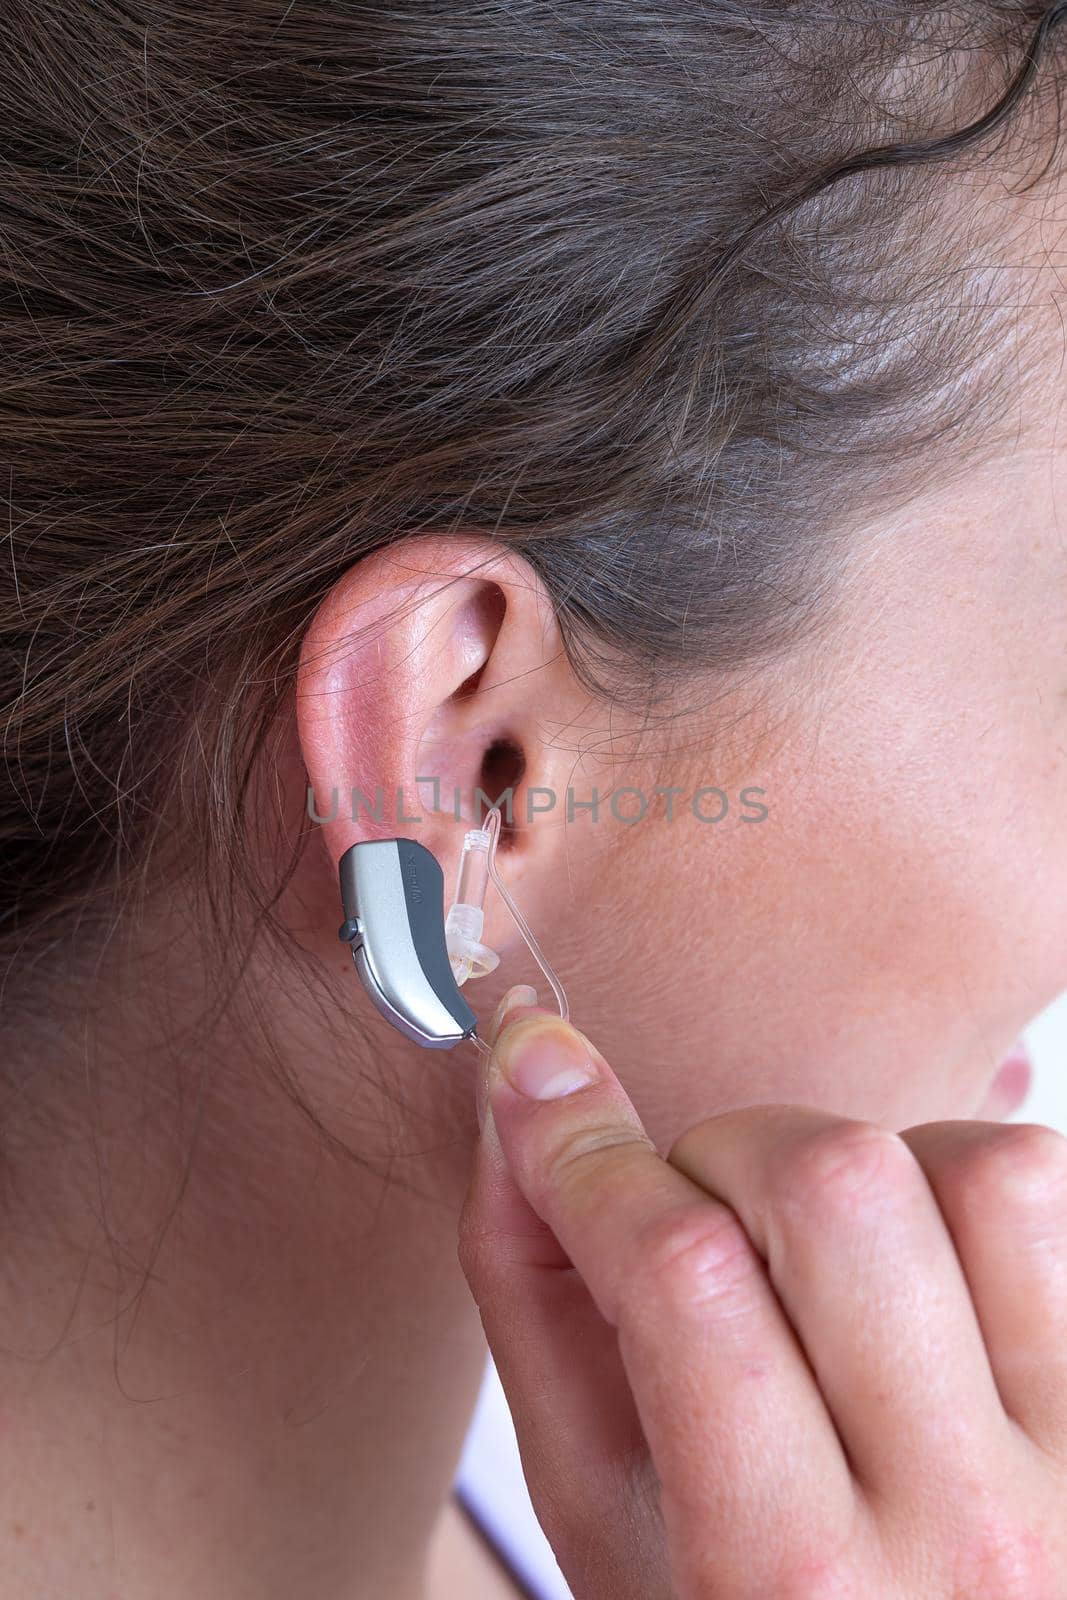 Hearing problems in a young woman by JPC-PROD